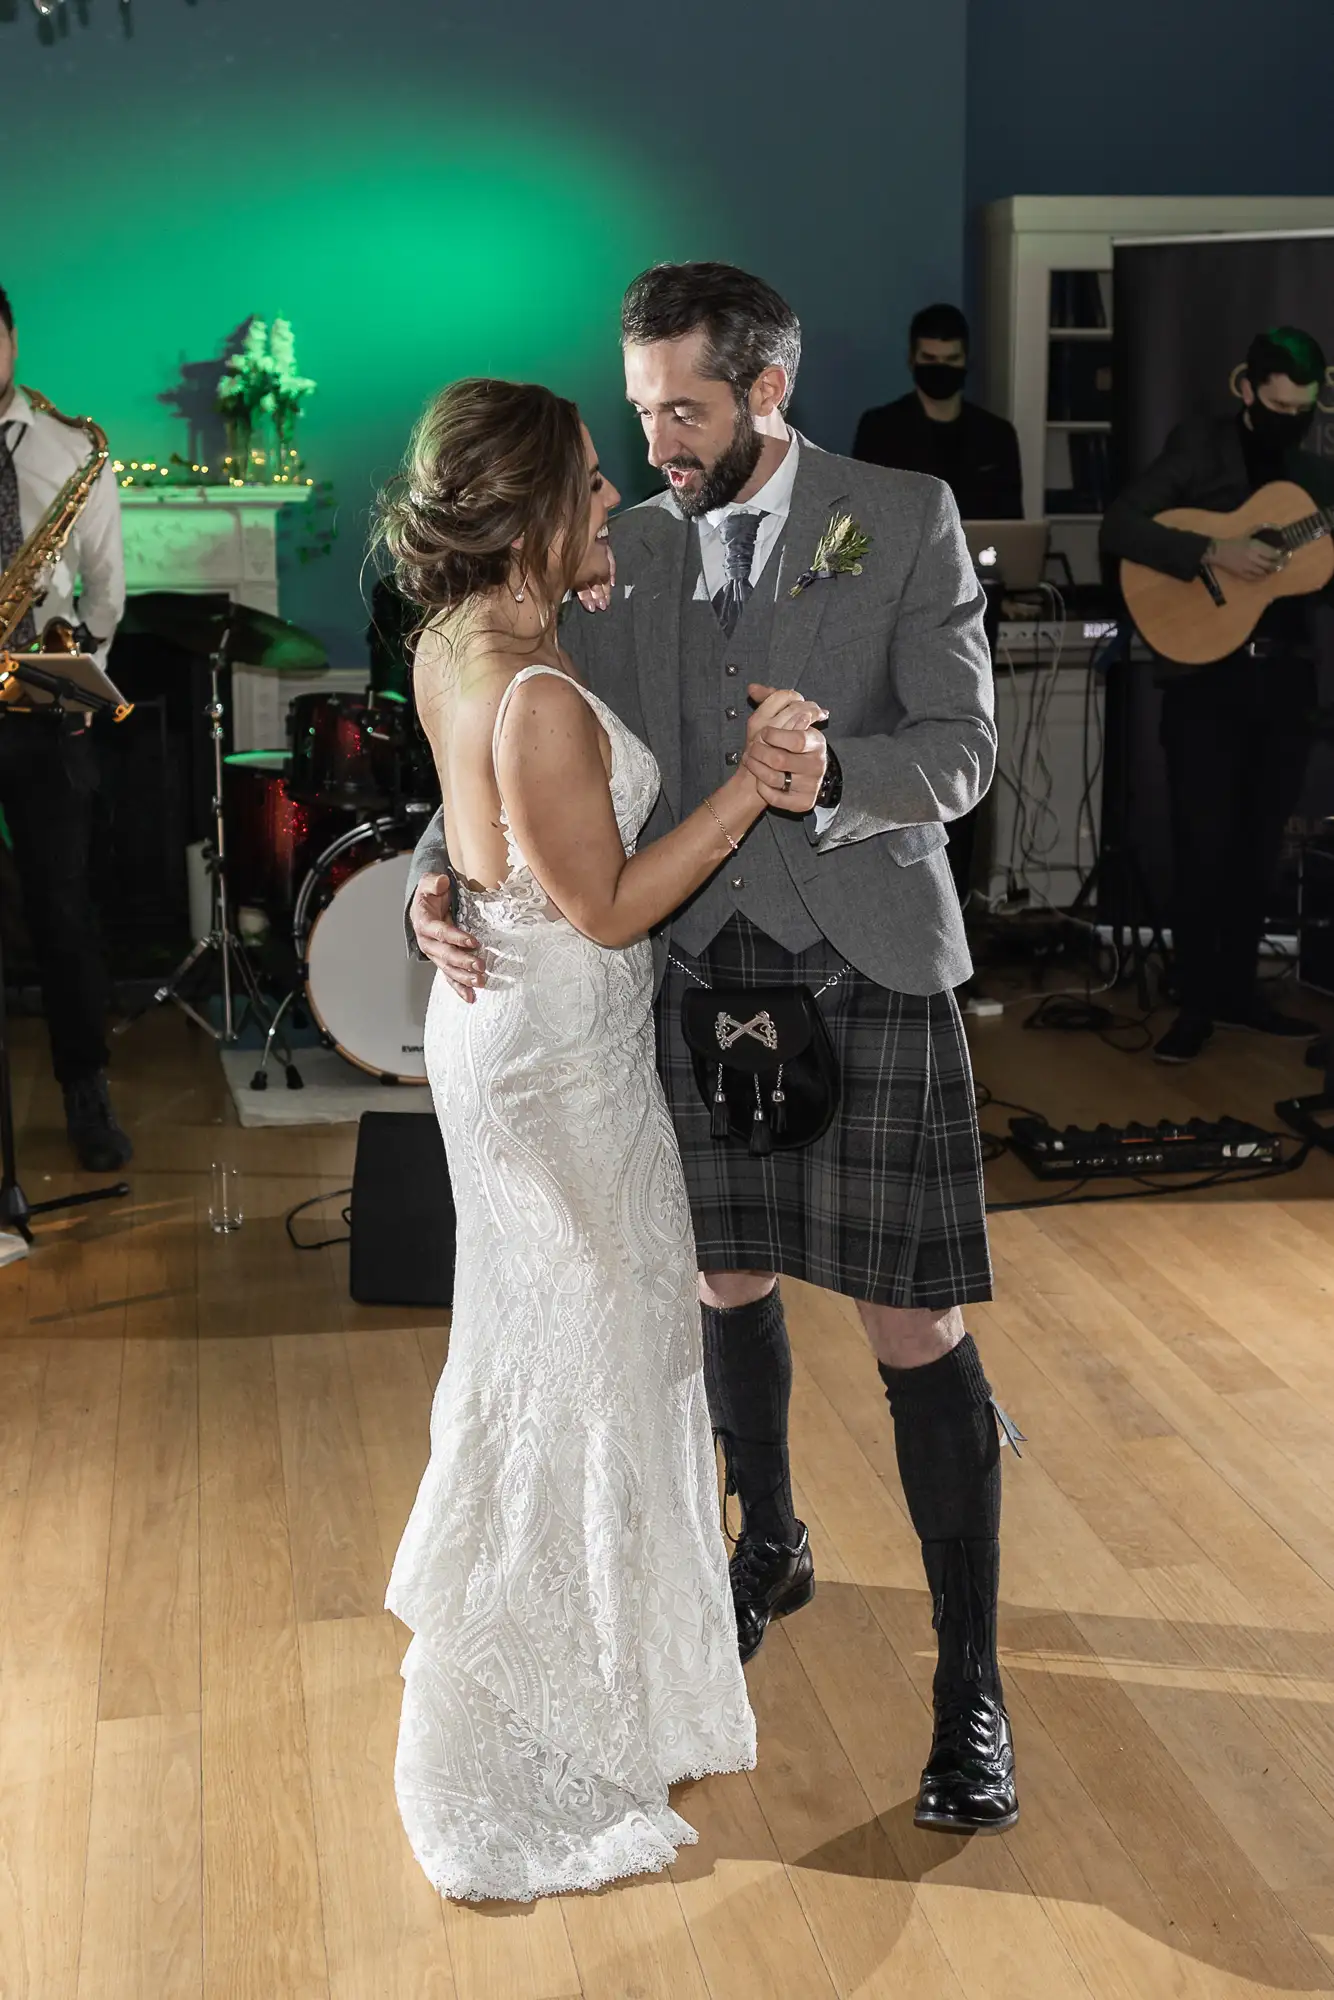 A bride and groom share a dance, the groom in a kilt and sporran, with a live band in the background, at their wedding reception.